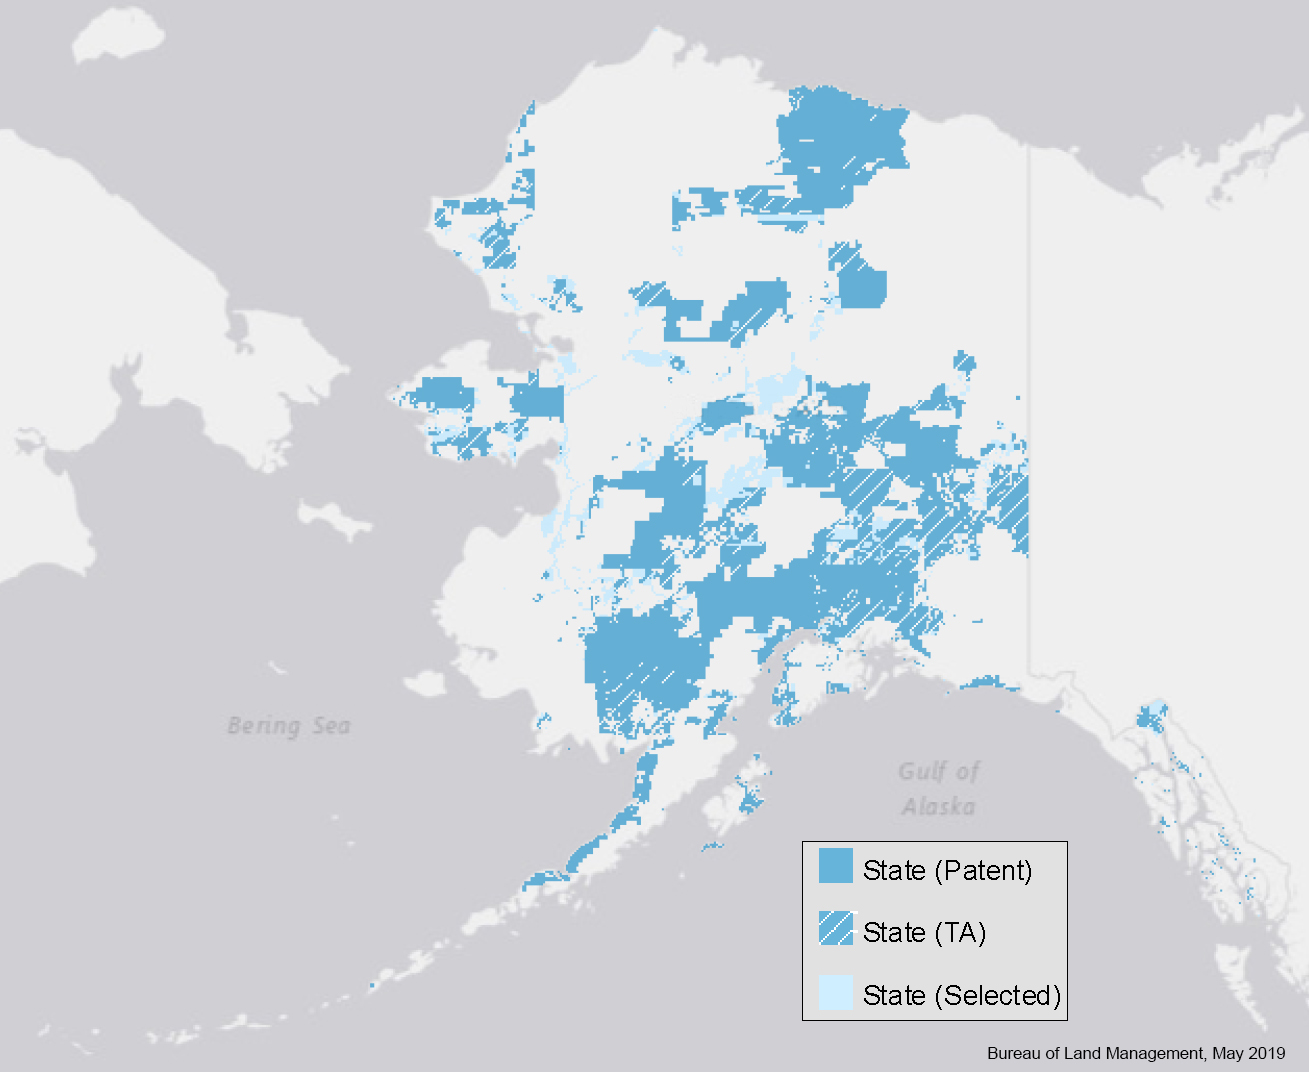 Map of Alaska showing areas where the State of Alaska has patented lands, tentative approved, and State Selected lands.